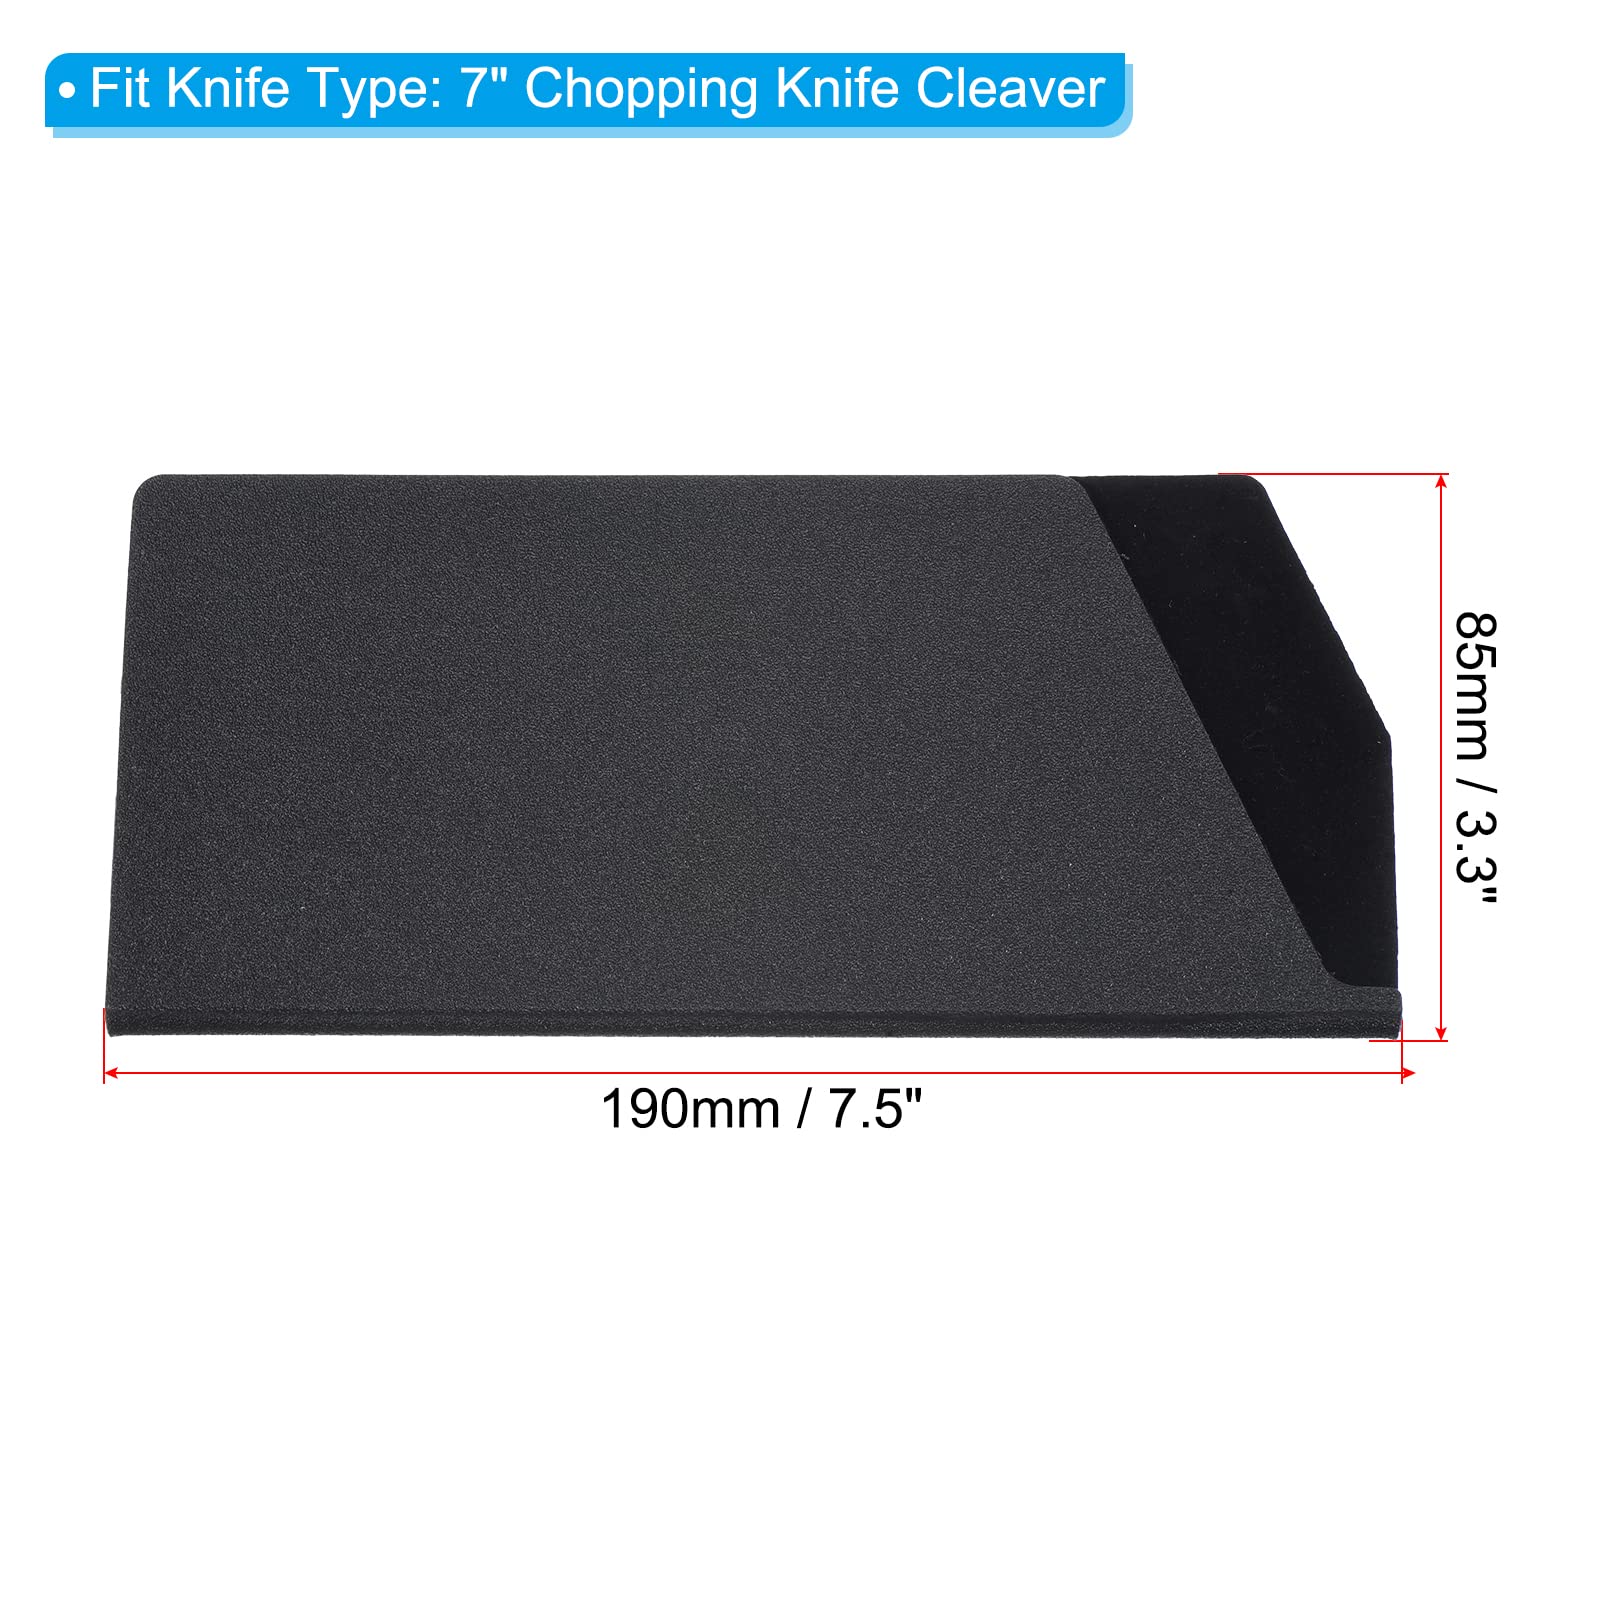 PATIKIL ABS Knife Cover Sleeves for 7" Chopping Knife Cleaver, Knives Edge Guard Blade Protector Universal Knife Sheath for Home Kitchen, Black